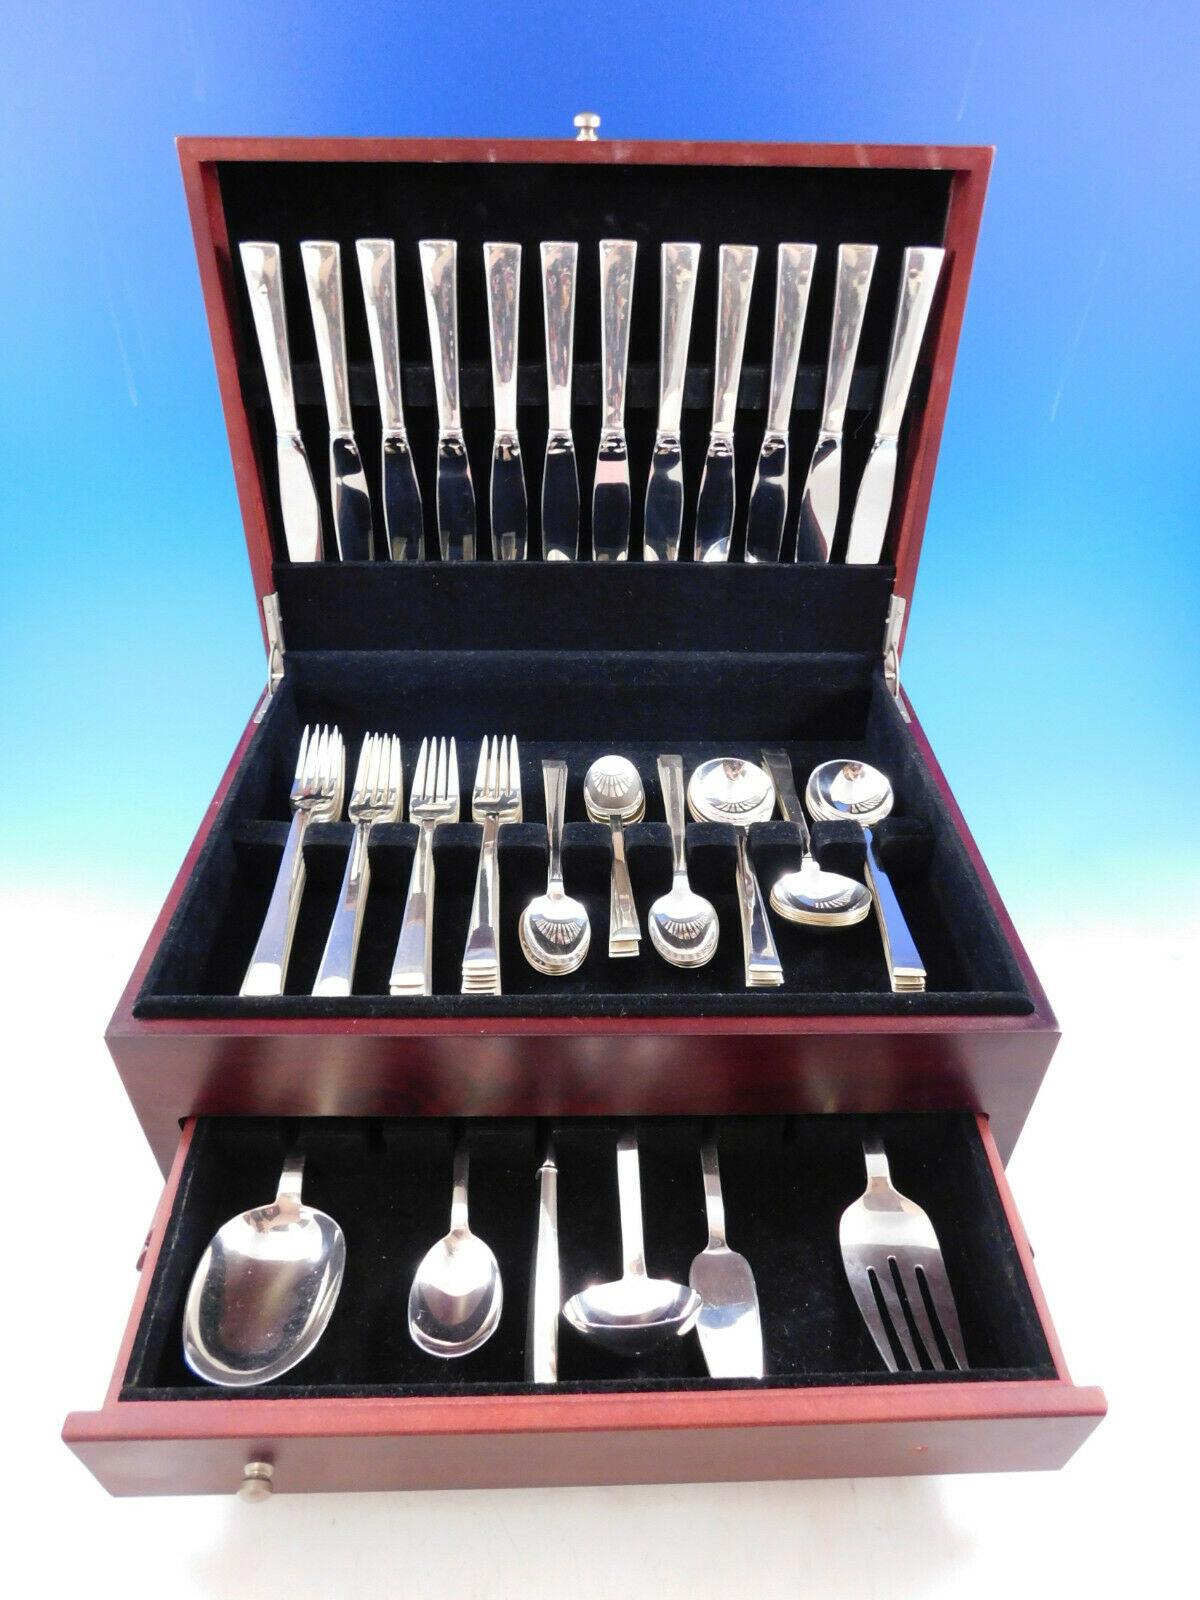 Continental is the perfect pattern choice for those who are looking for a highly polished, clean, contemporary look.

Continental By International Sterling Silver flatware set - 66 pieces. This set includes:

12 Regular Knives, 8 7/8